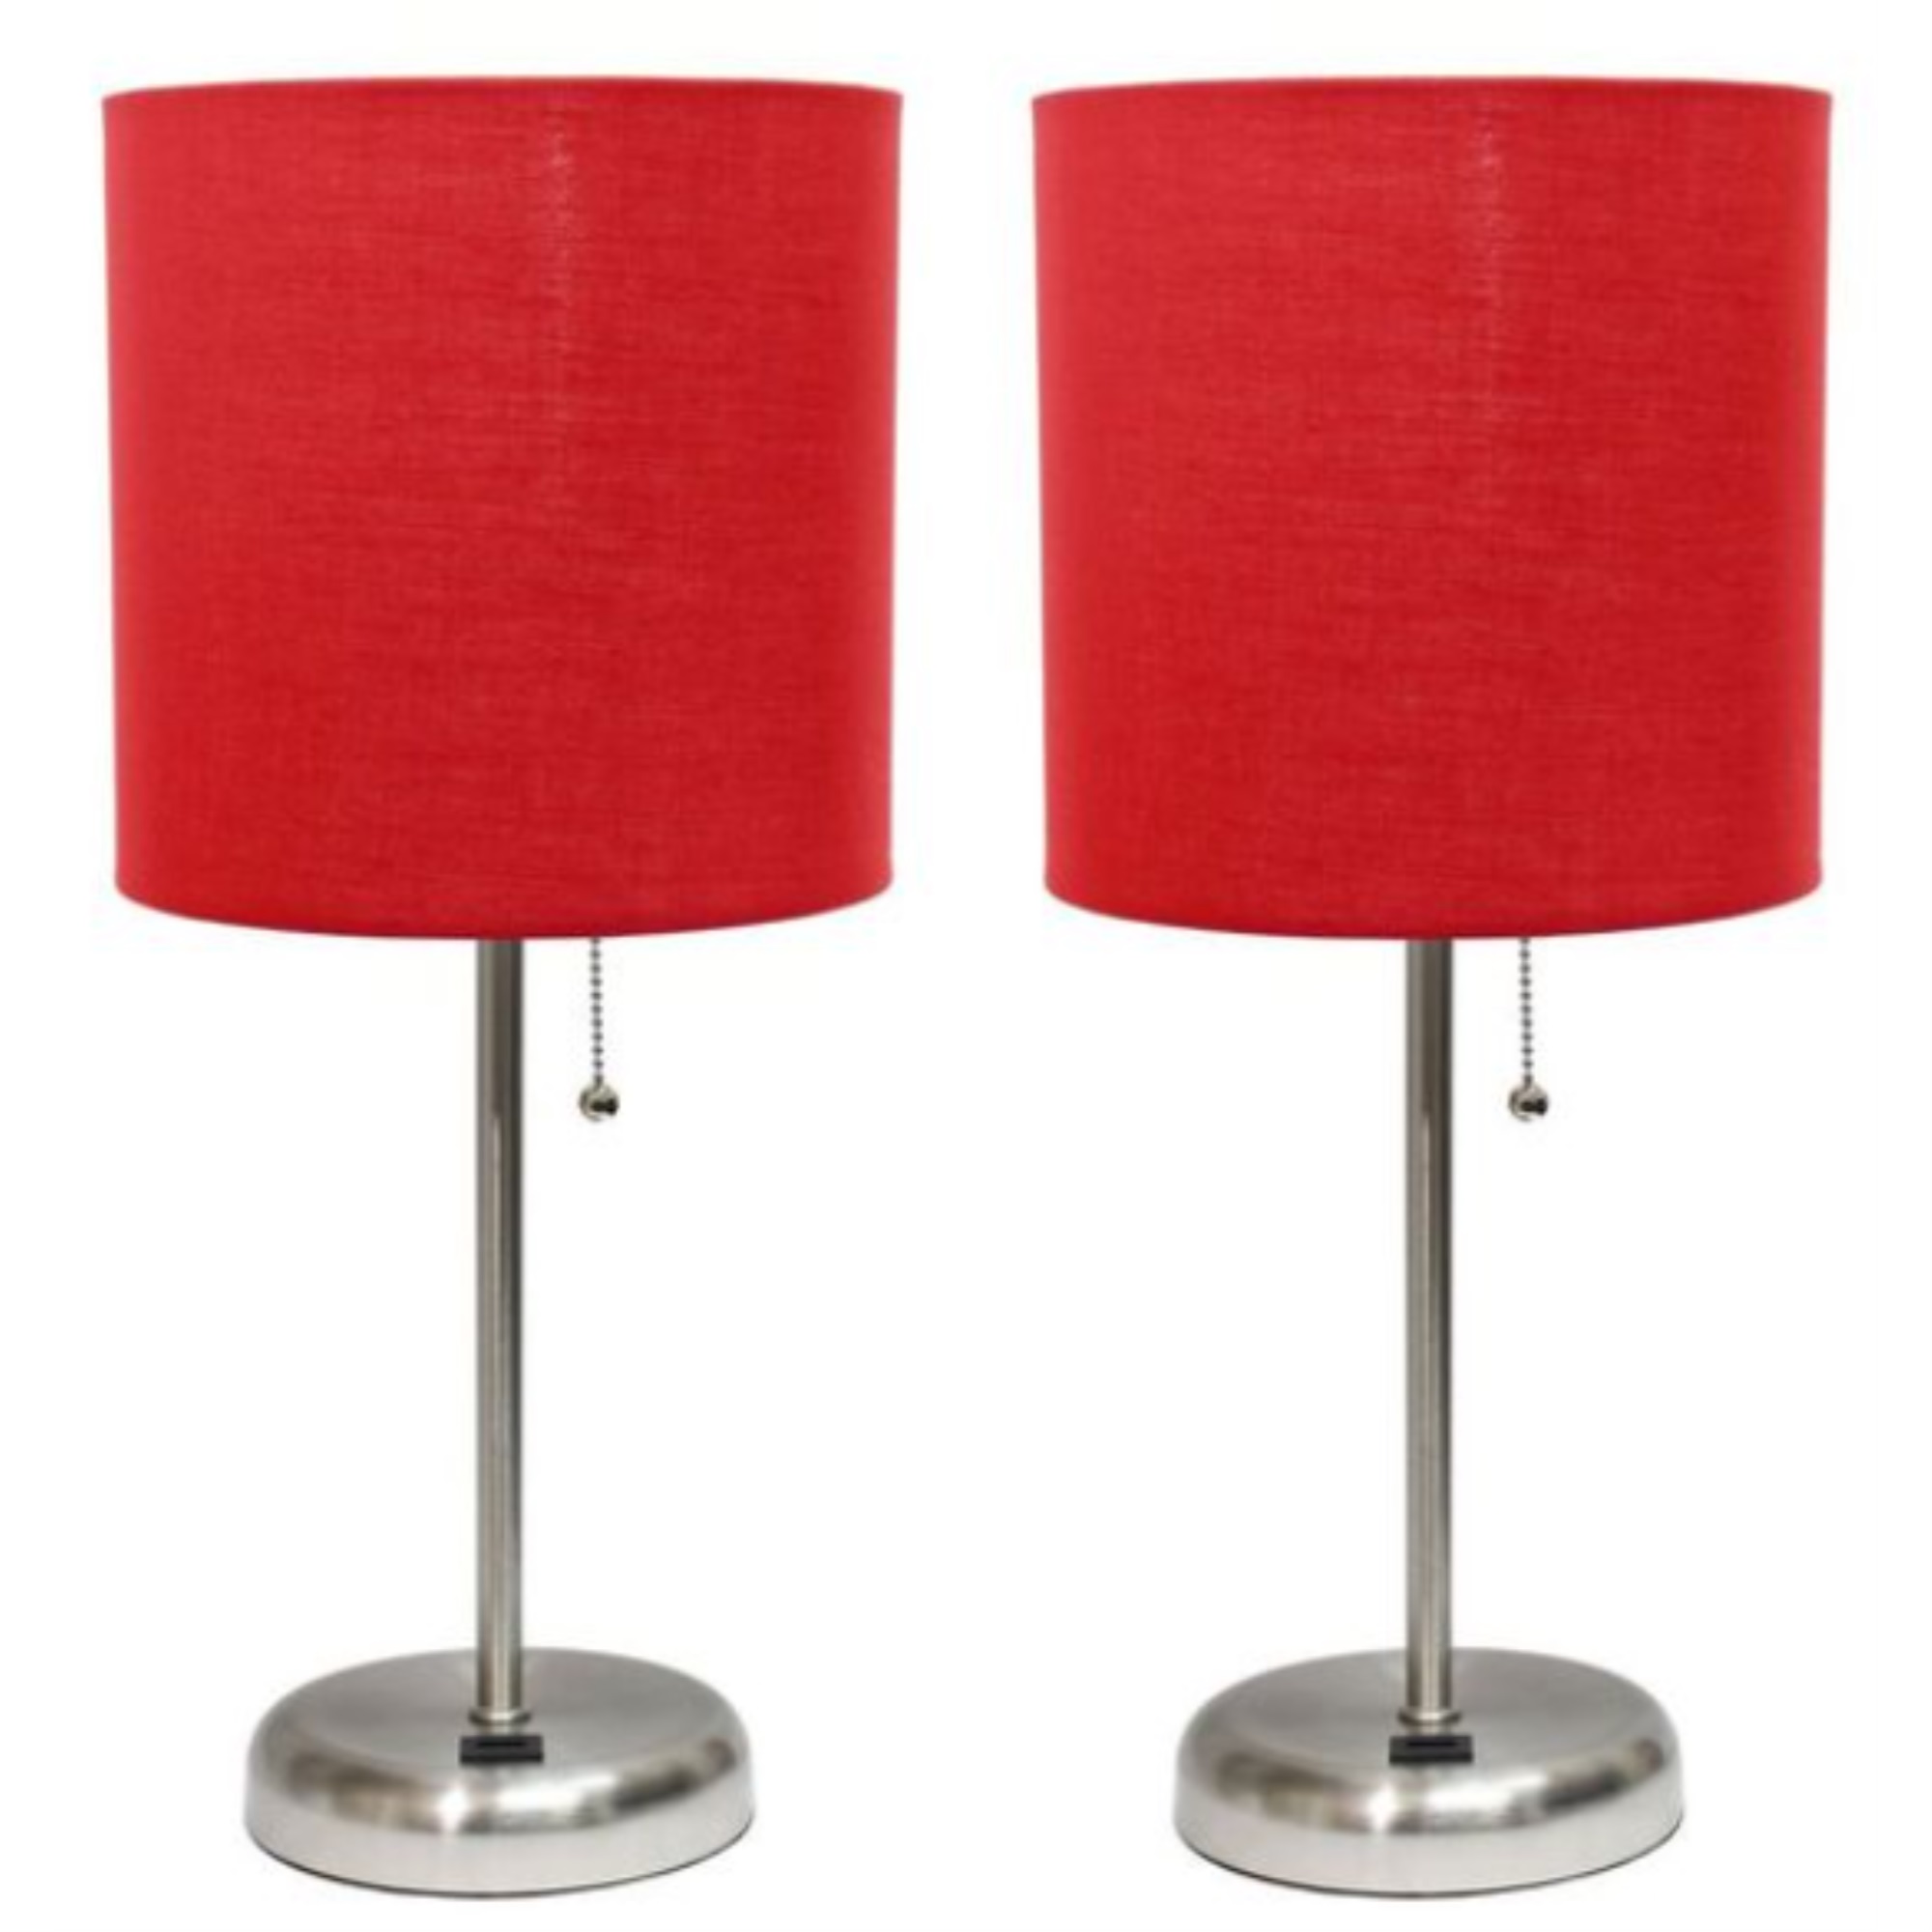 LimeLights Stick Lamp with USB charging port and Fabric Shade 2 Pack Set, Red